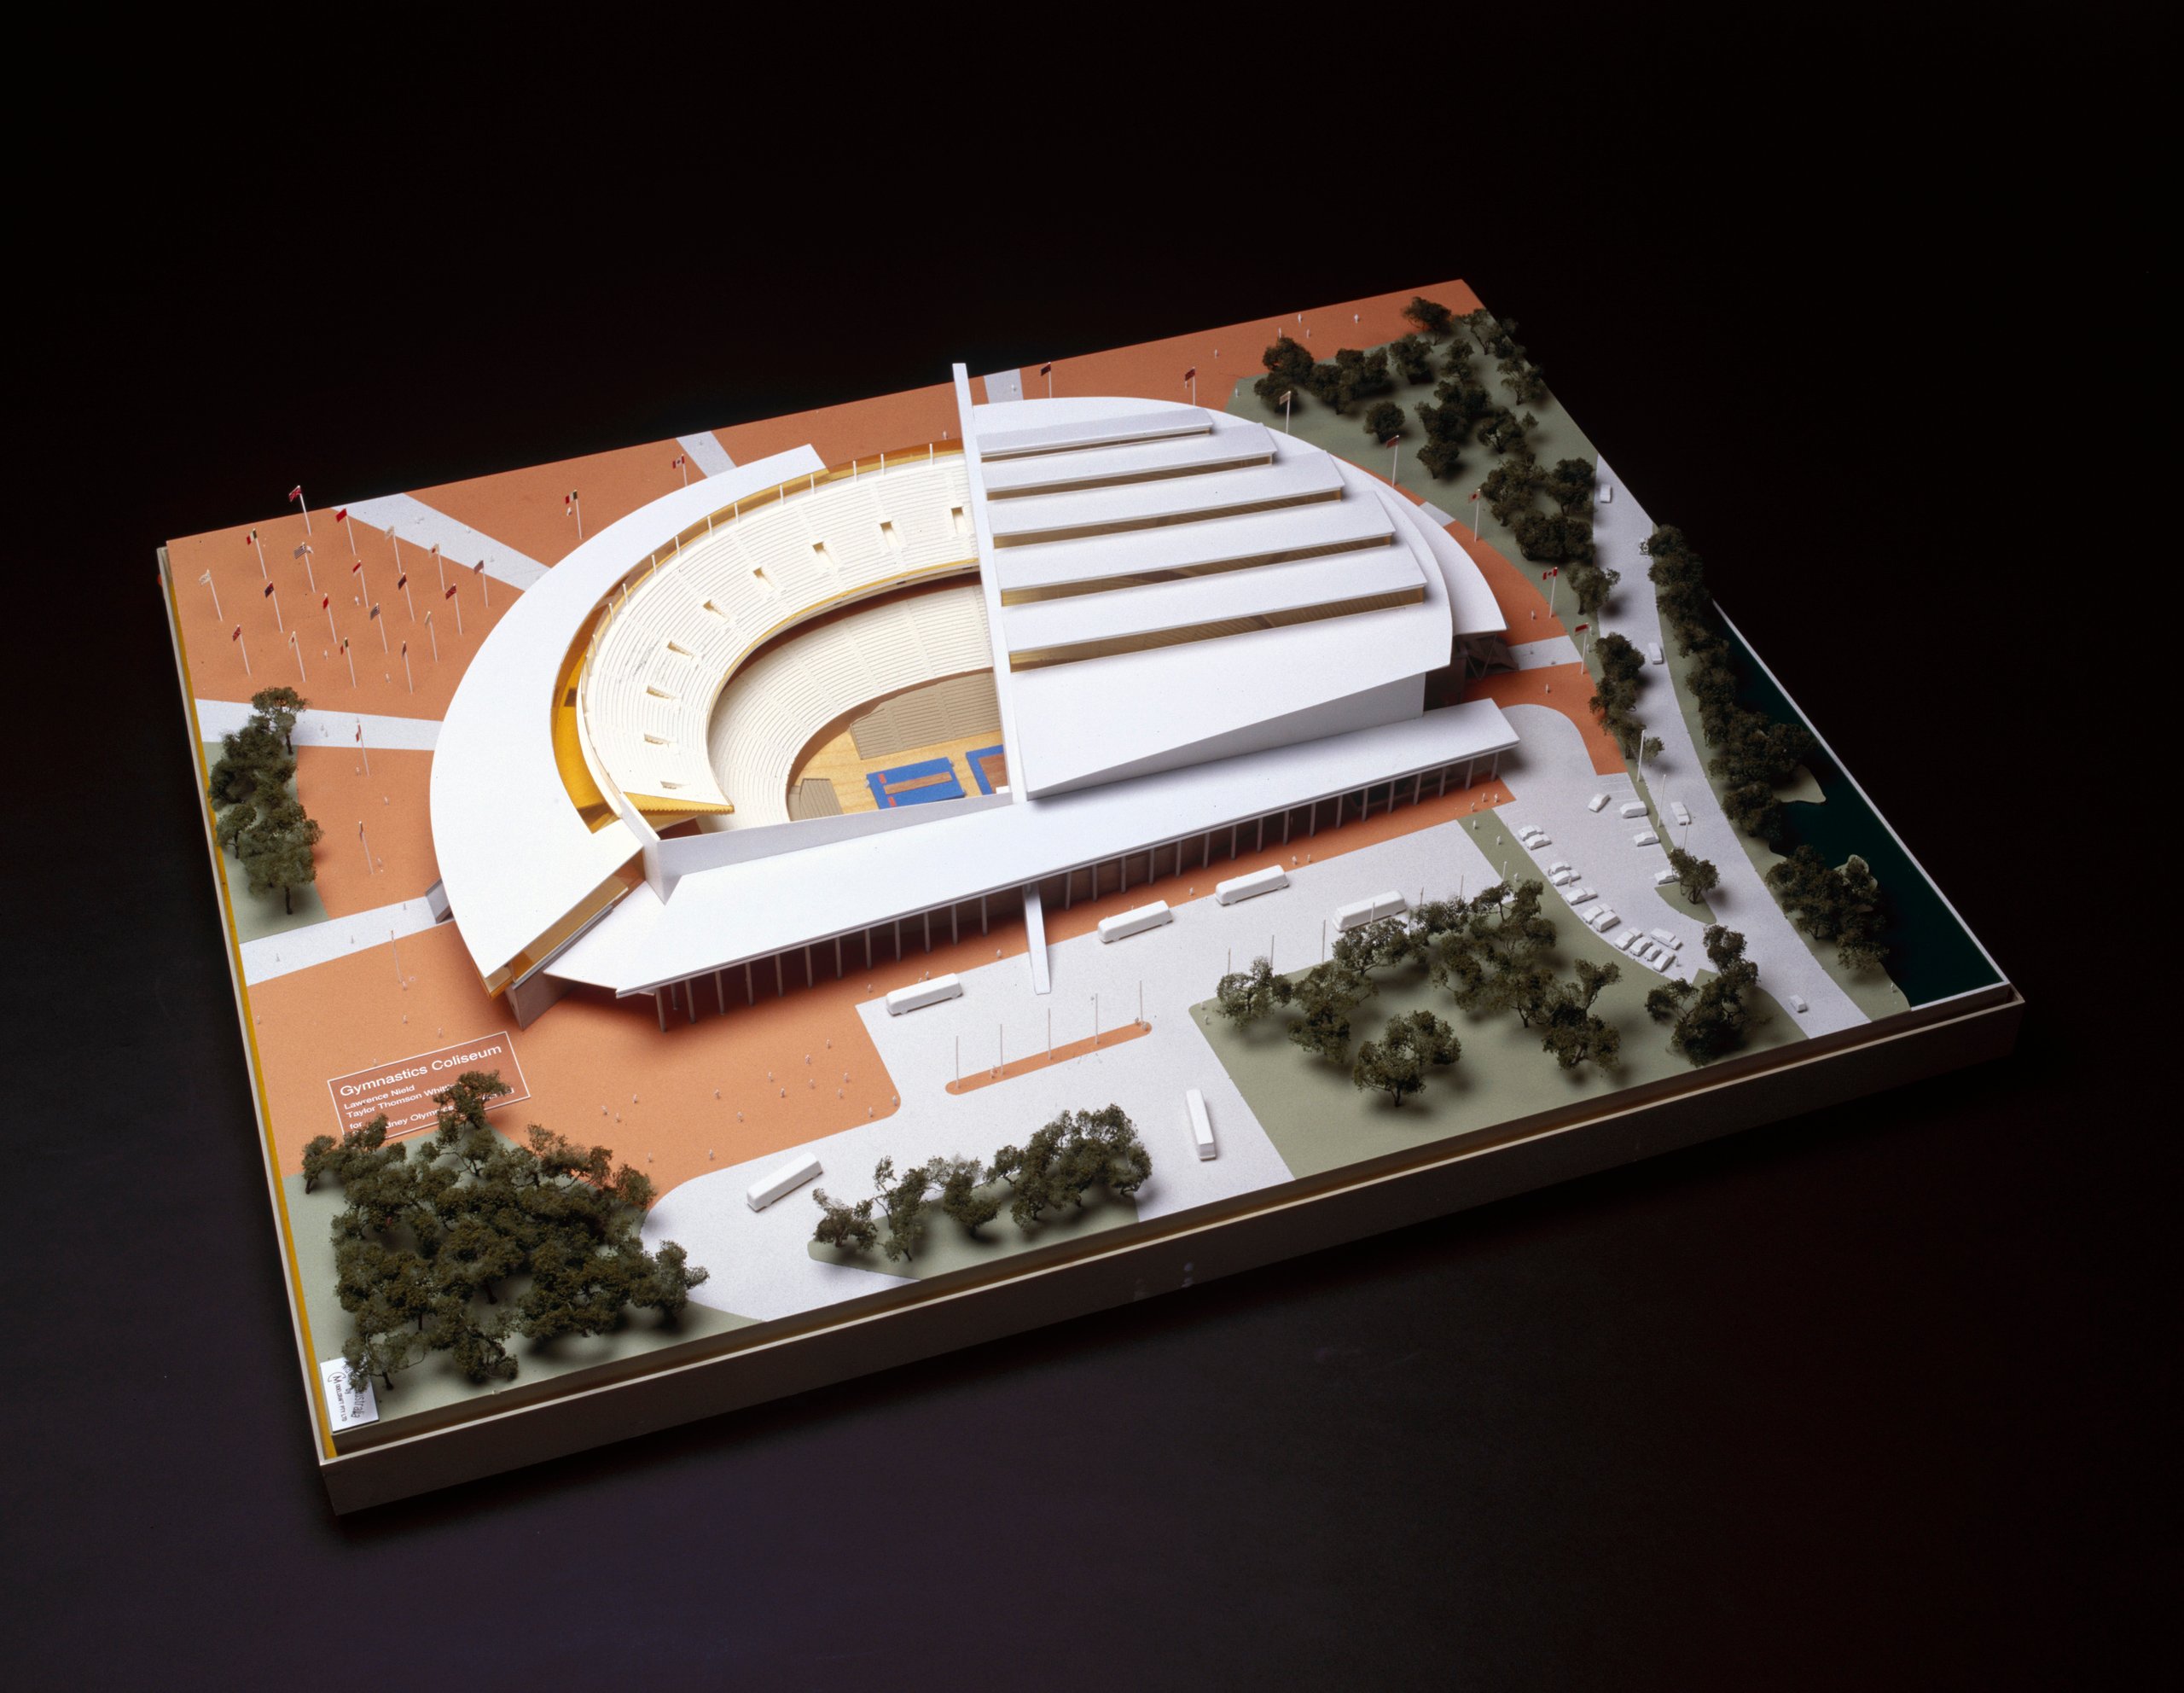 Architectural model of Gymnastics Coliseum by Lawrence Nield and Taylor Thompson Whitting